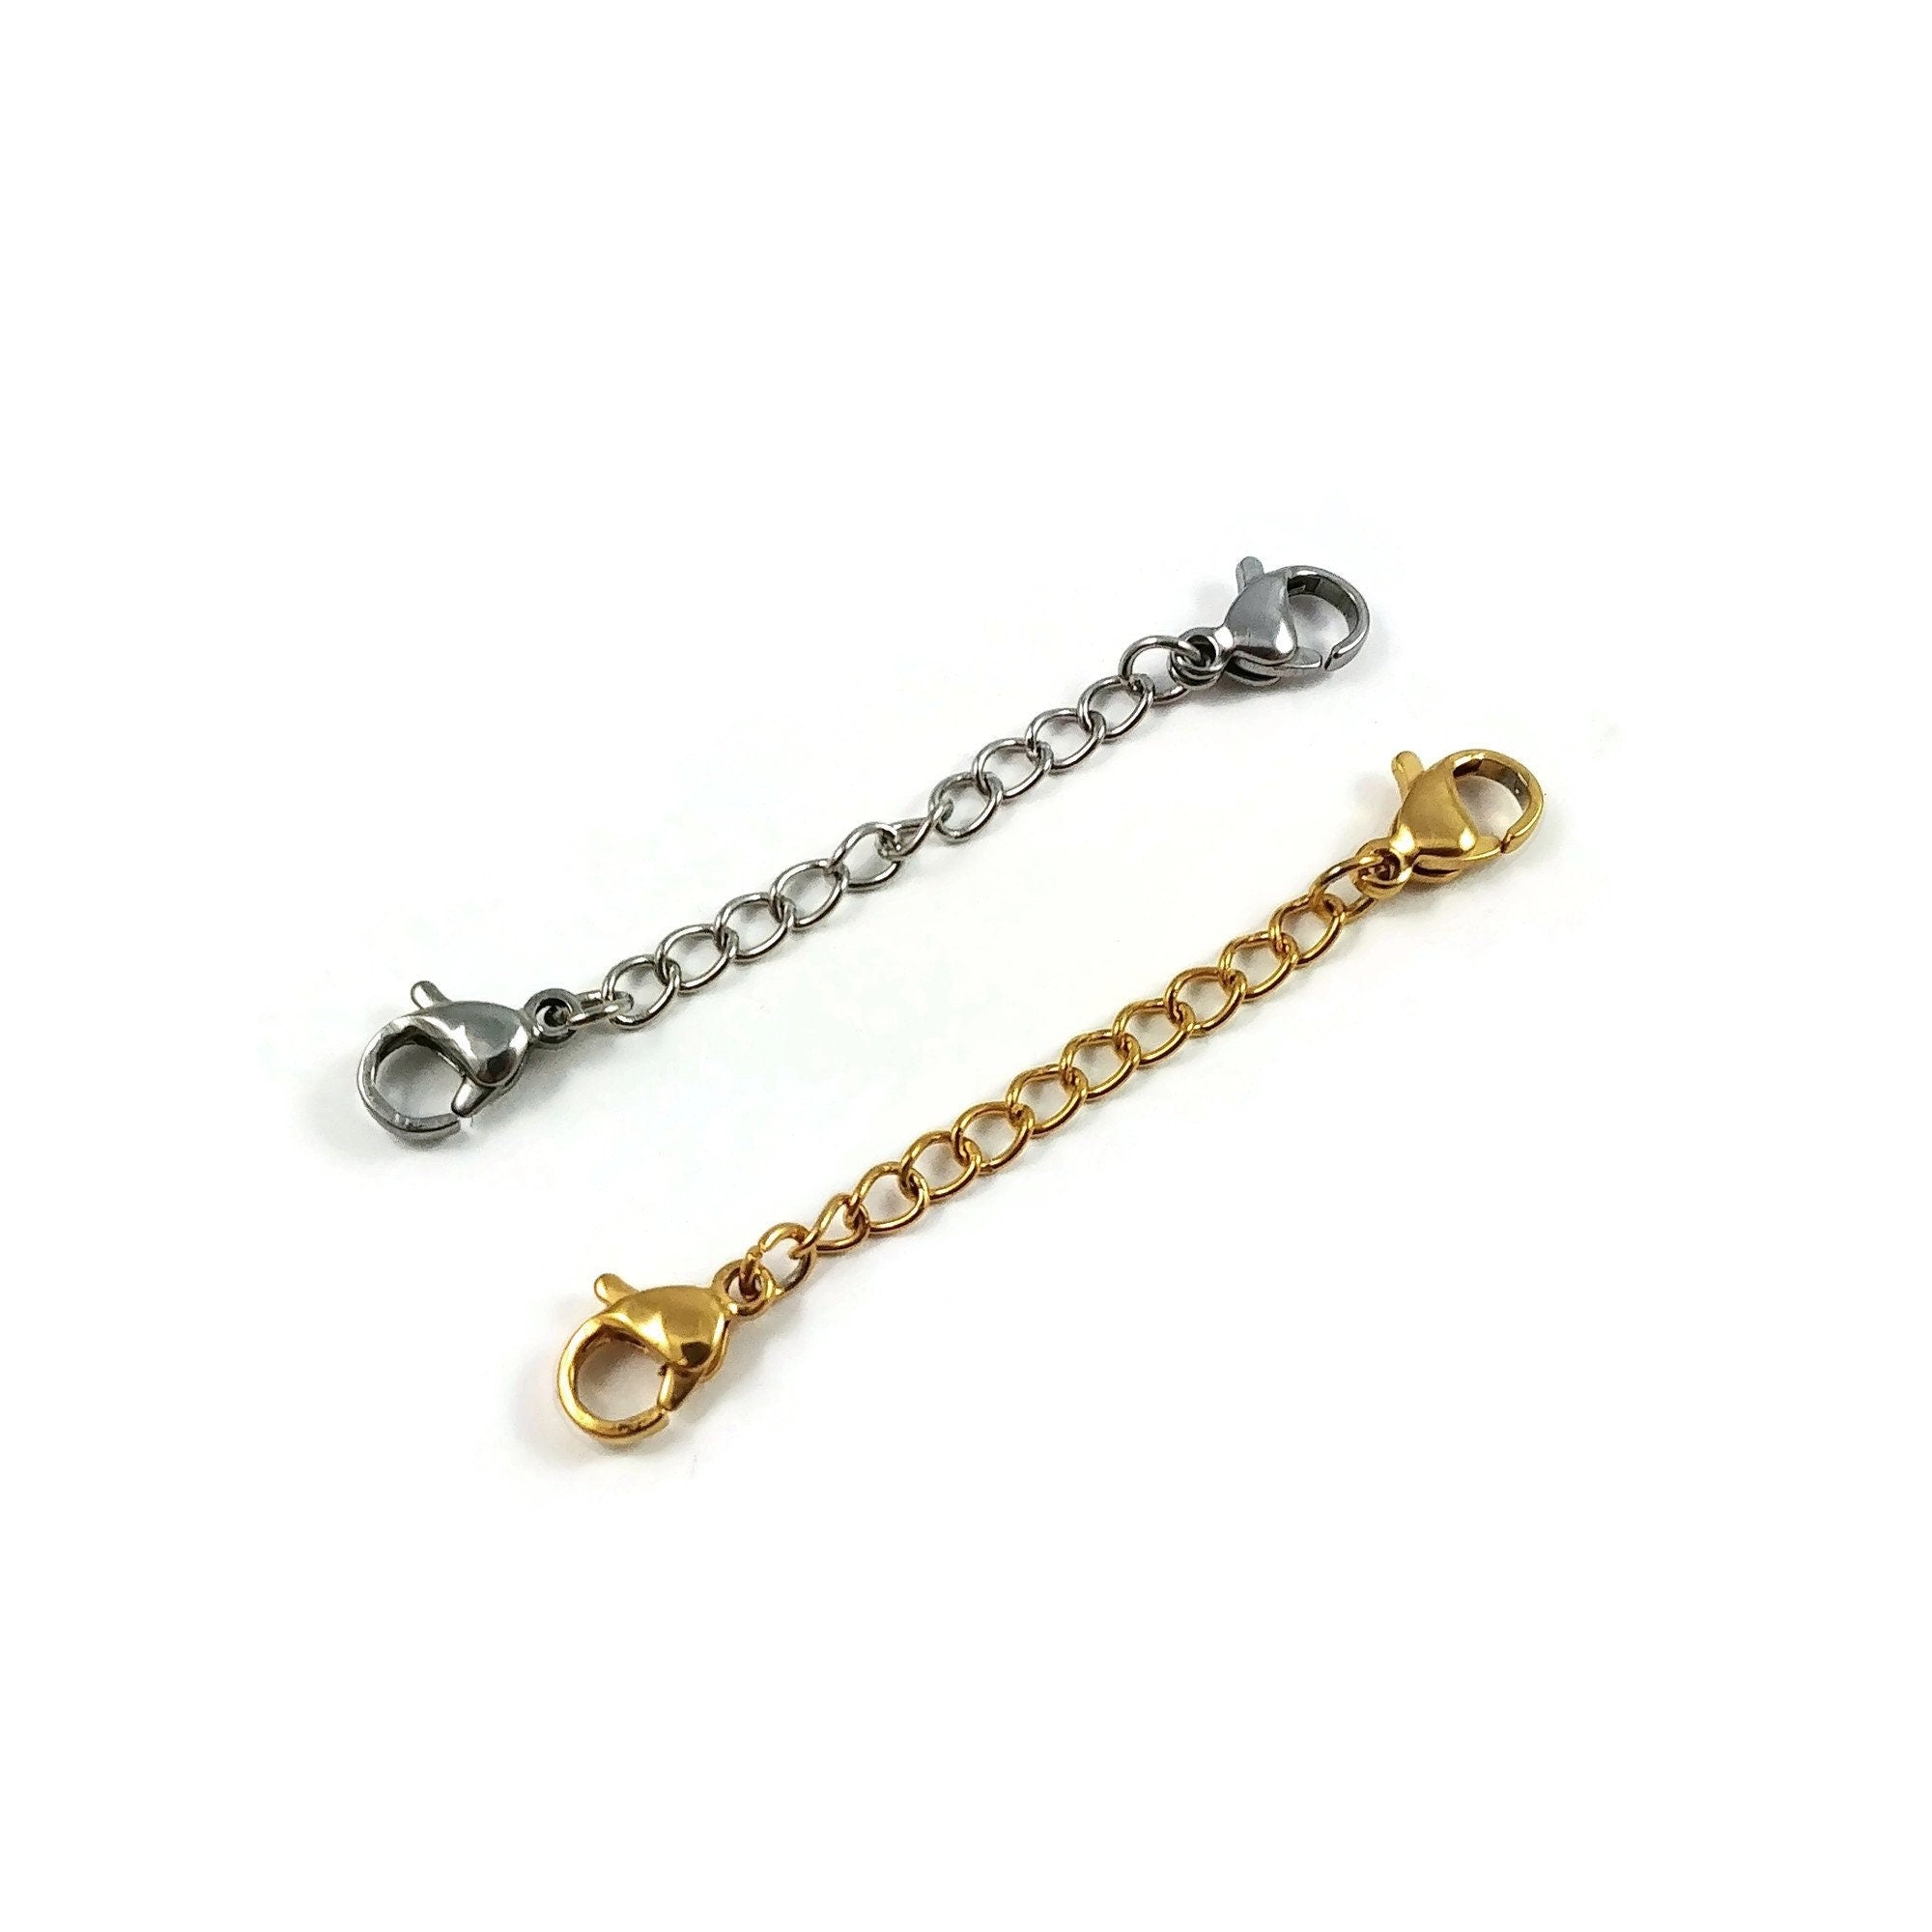 6pcs Stainless Steel Lobster Buckle Extender Chain Necklace Extension Chain  For Jewelry Making Findings (golden 50mm+75mm+100mm+125mm+150mm+25mm)